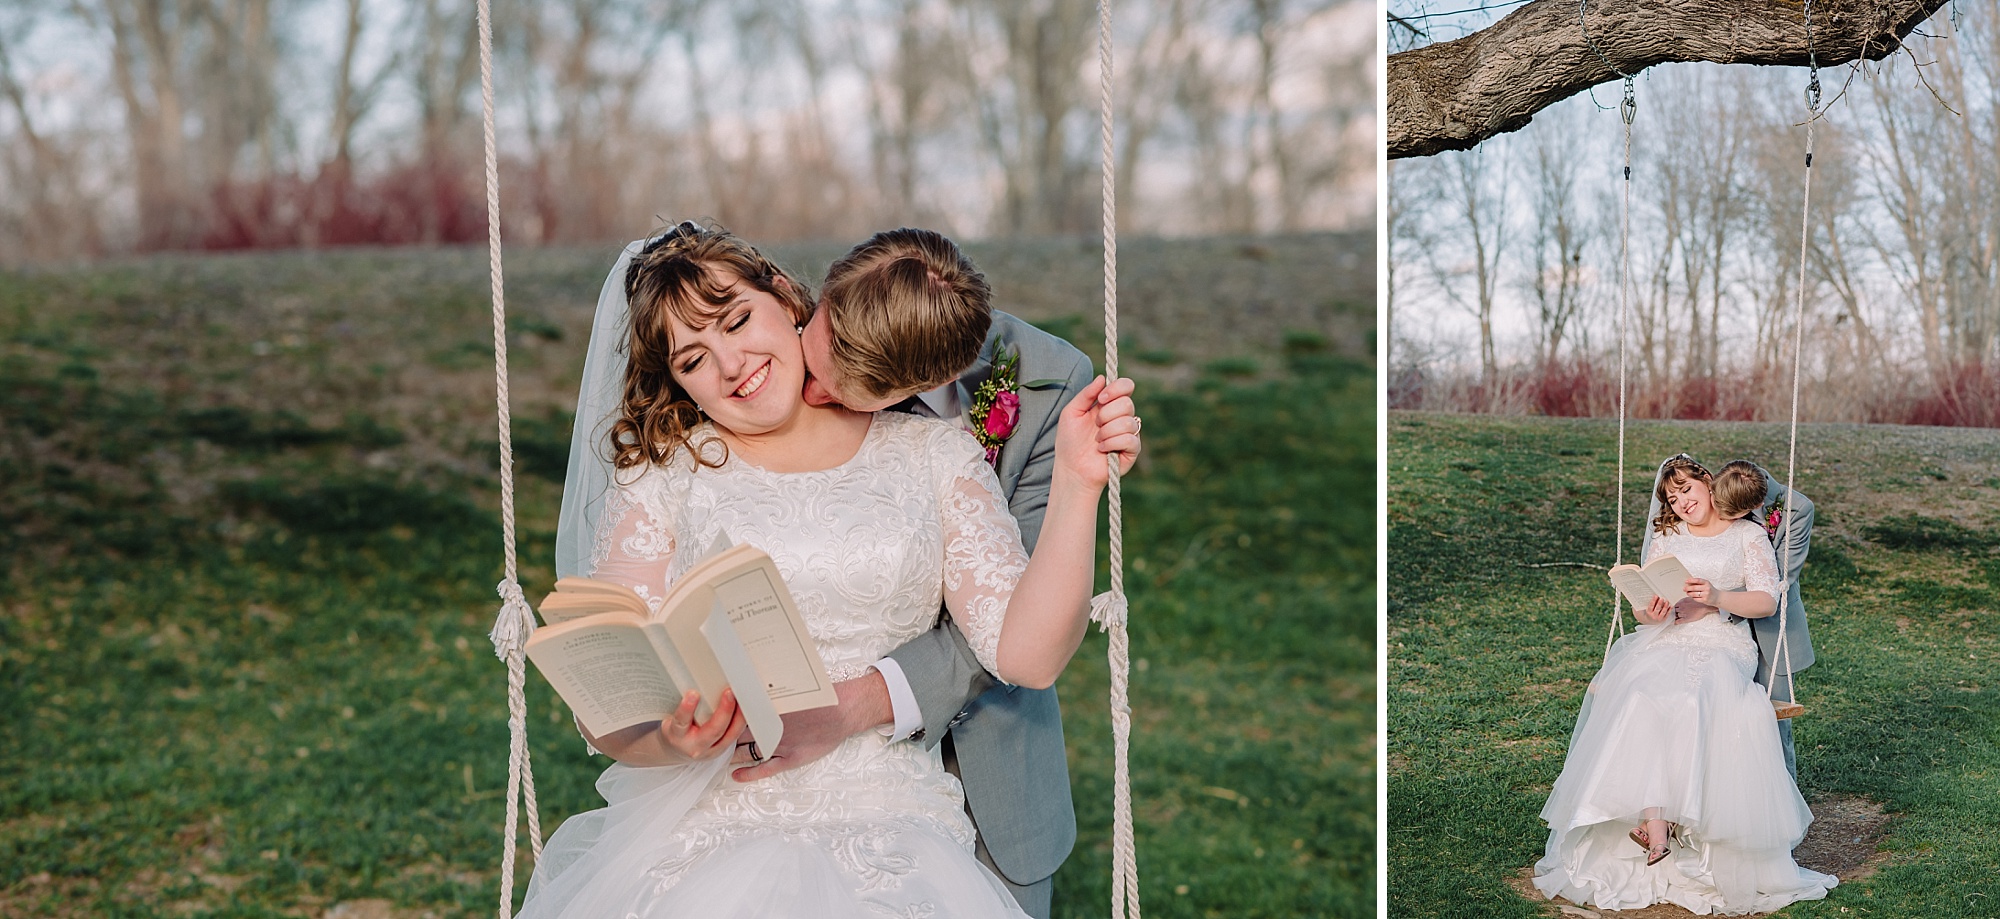 bride-reading-book-on-swing